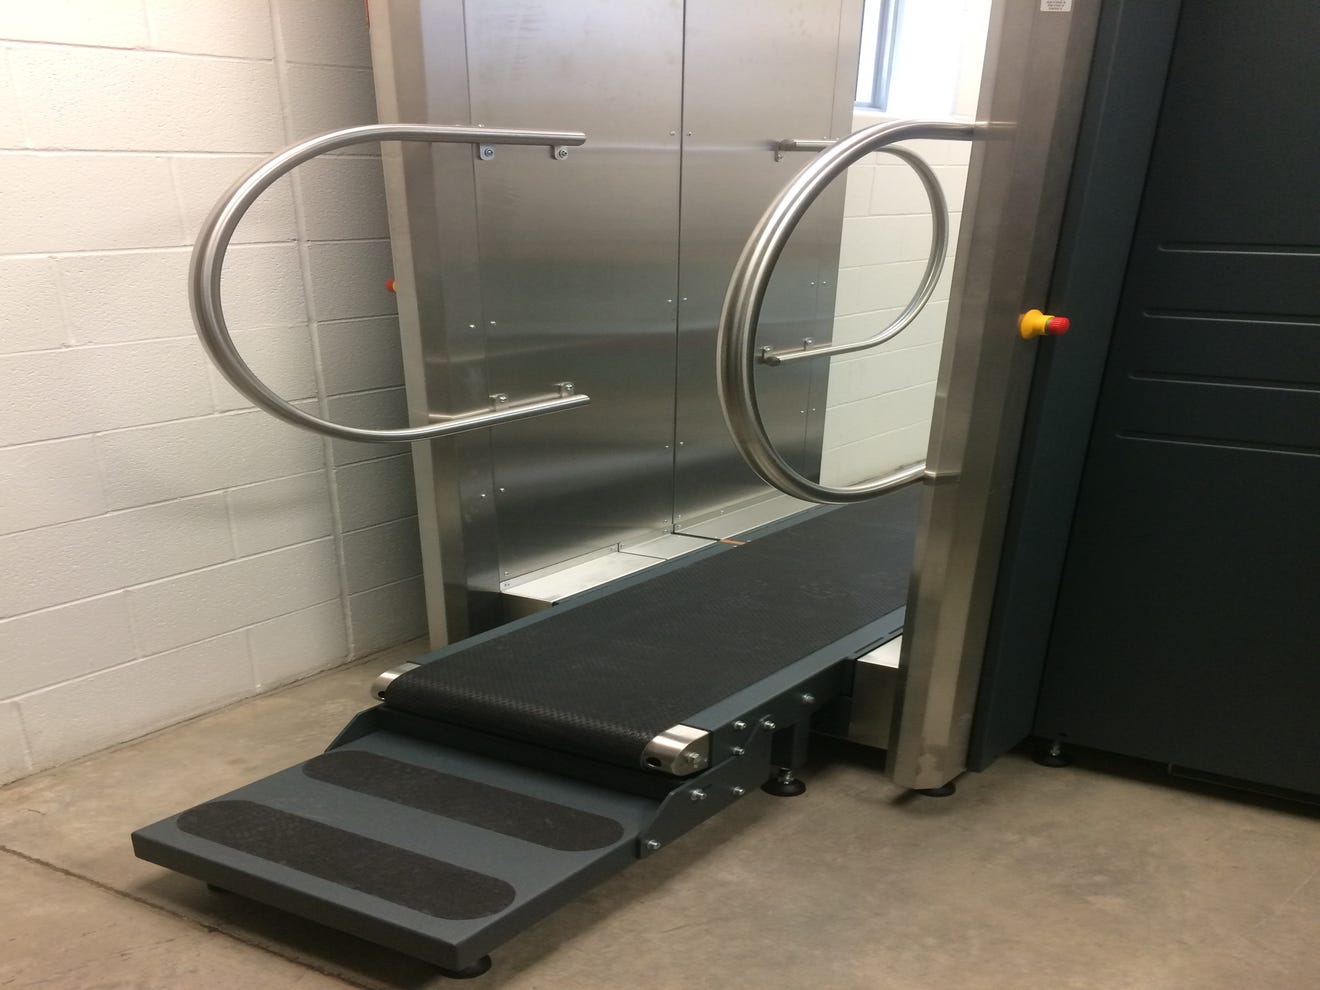 police body scanner snags contraband on inmates author: jon grad